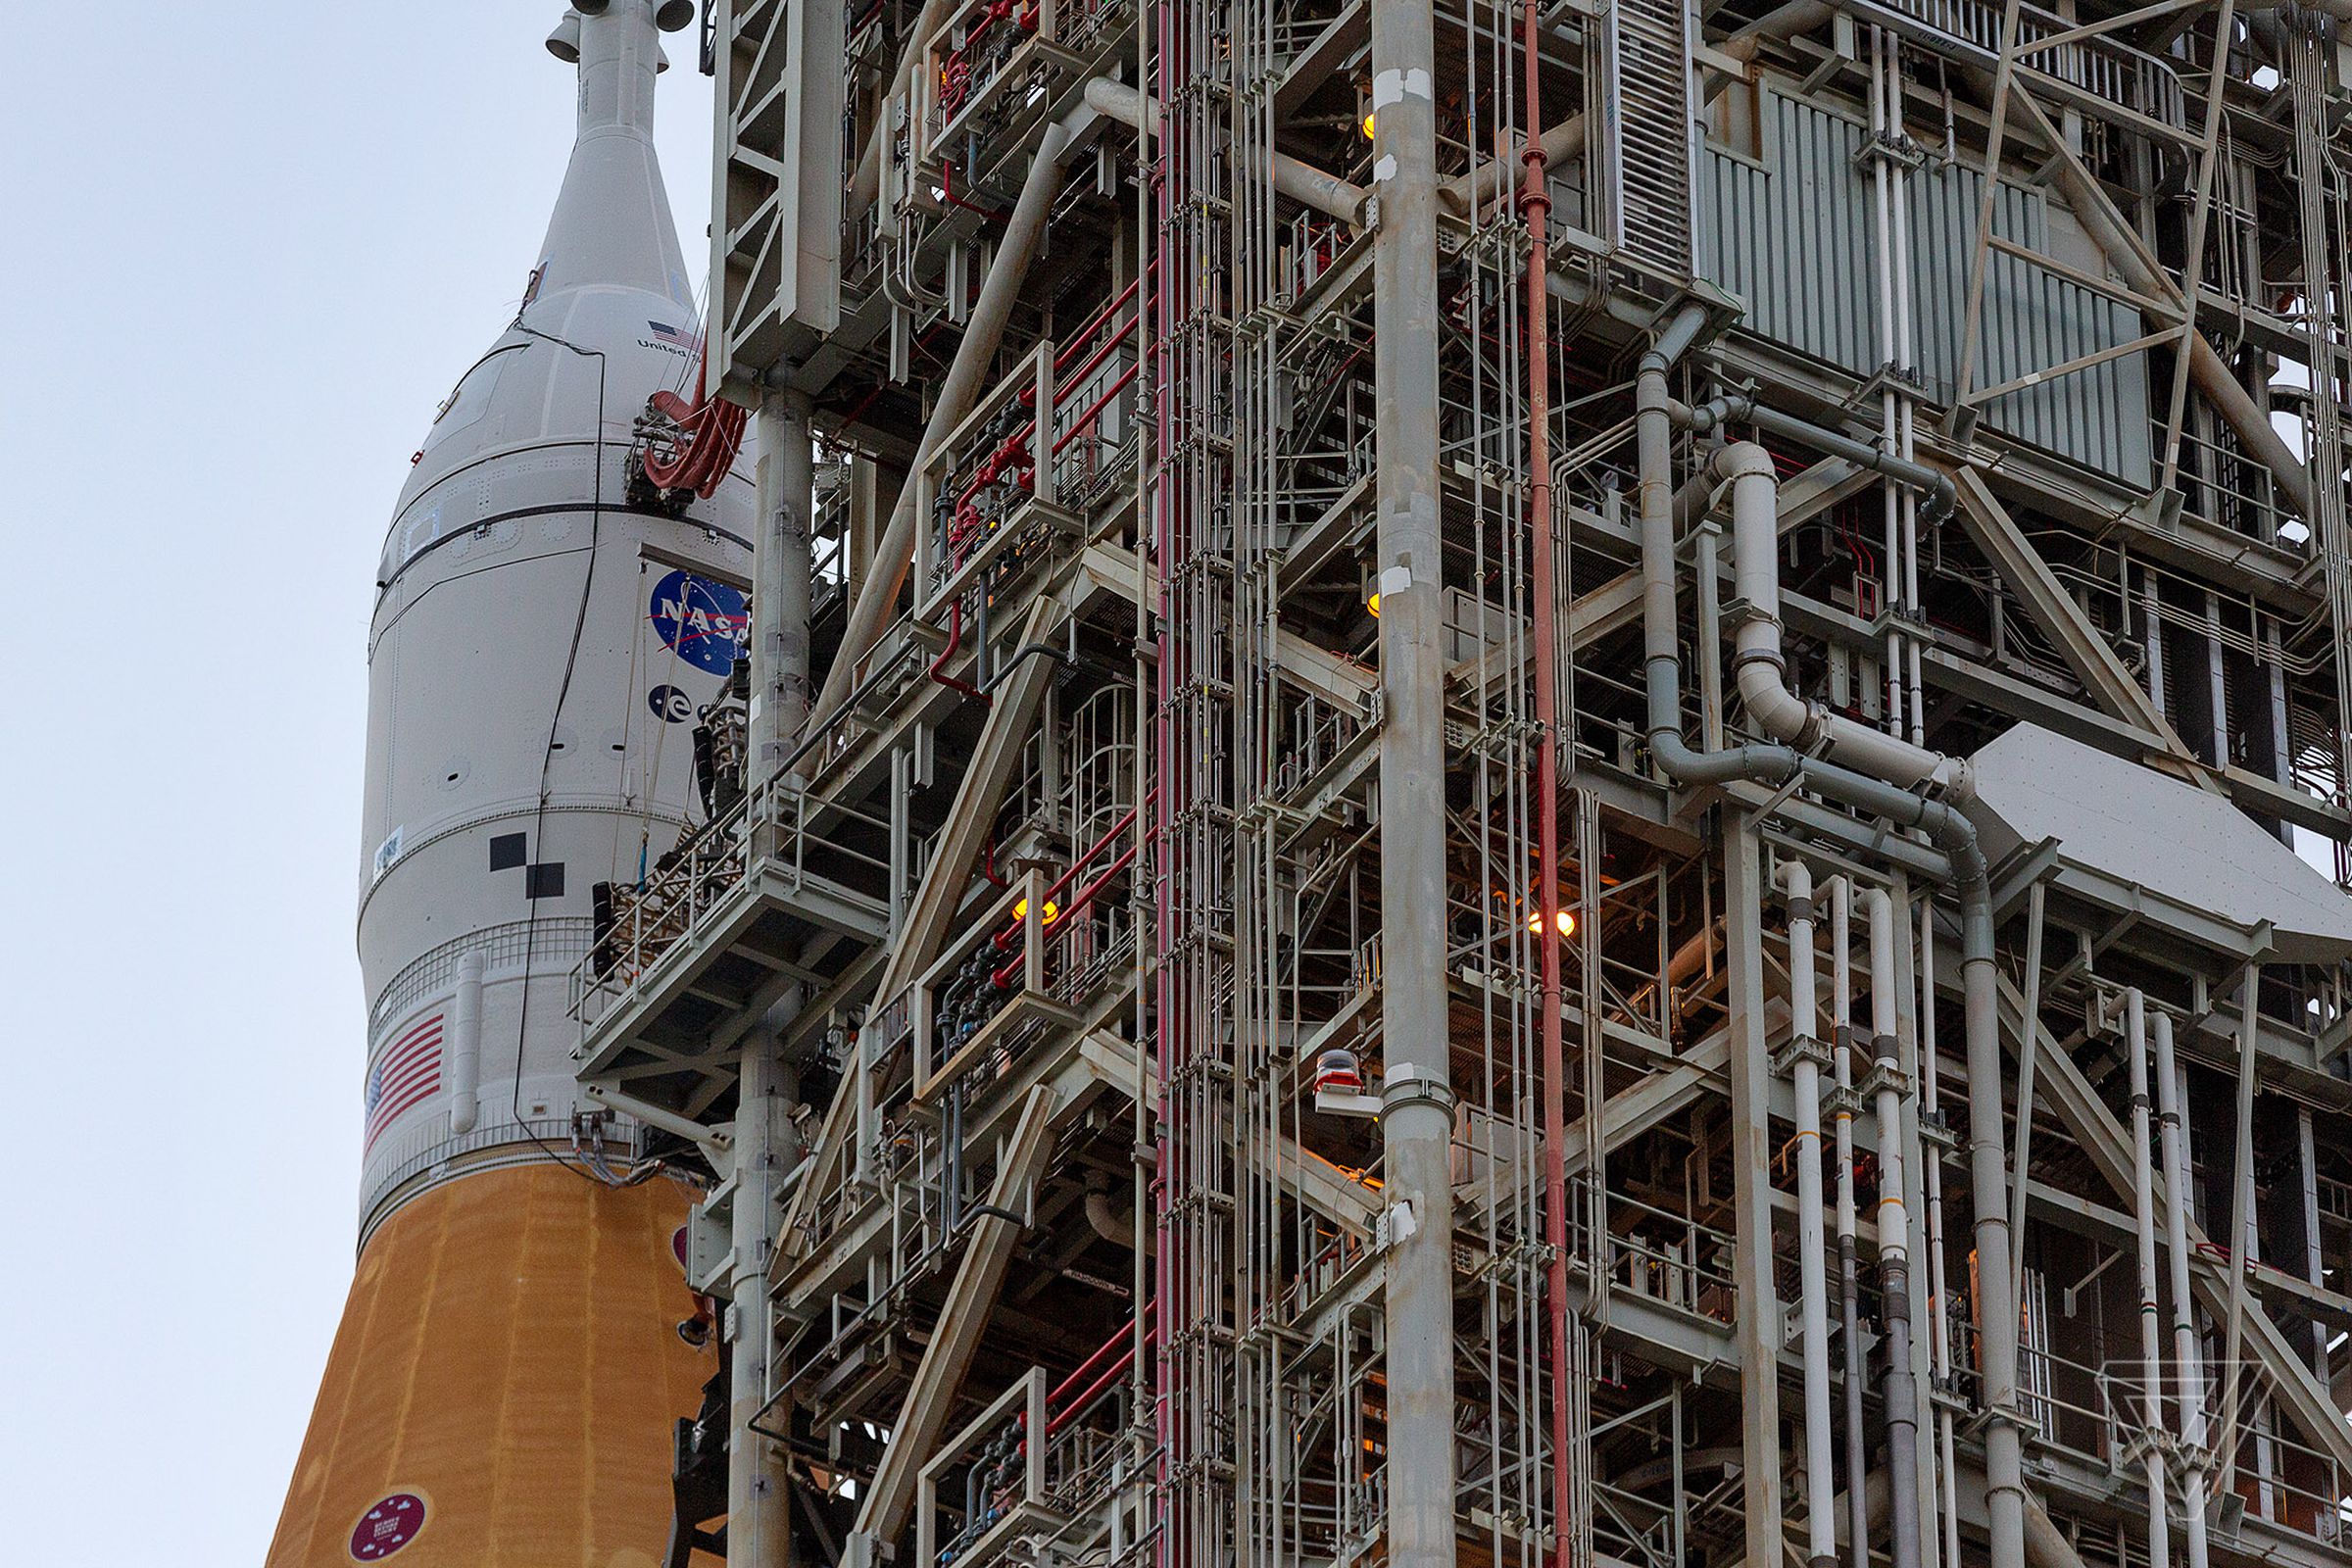 The mobile launch platform umbilical cords are attached to the rocket.